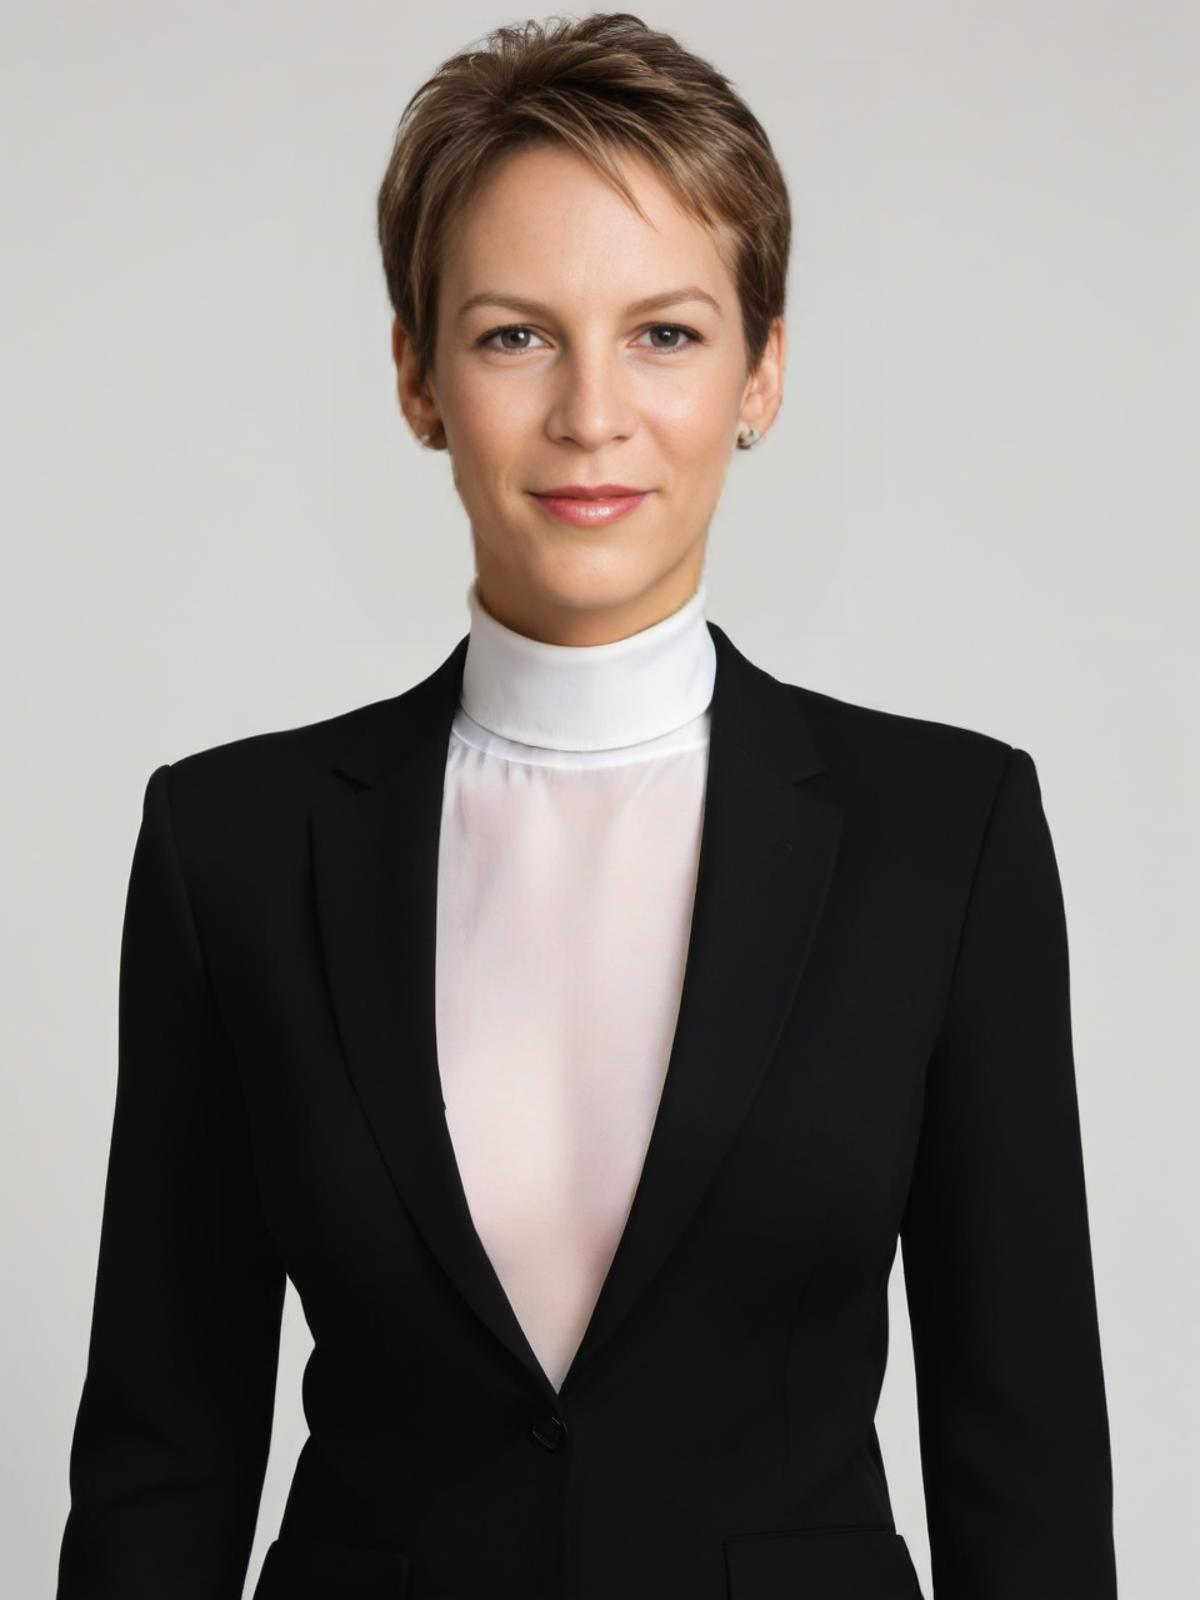 UHD, 4k,a young girl supermodel Laurie_Strode, age 20,<lora:Laurie_Strode:0.7> wearing turtle neck shirt, tie, posing mode...